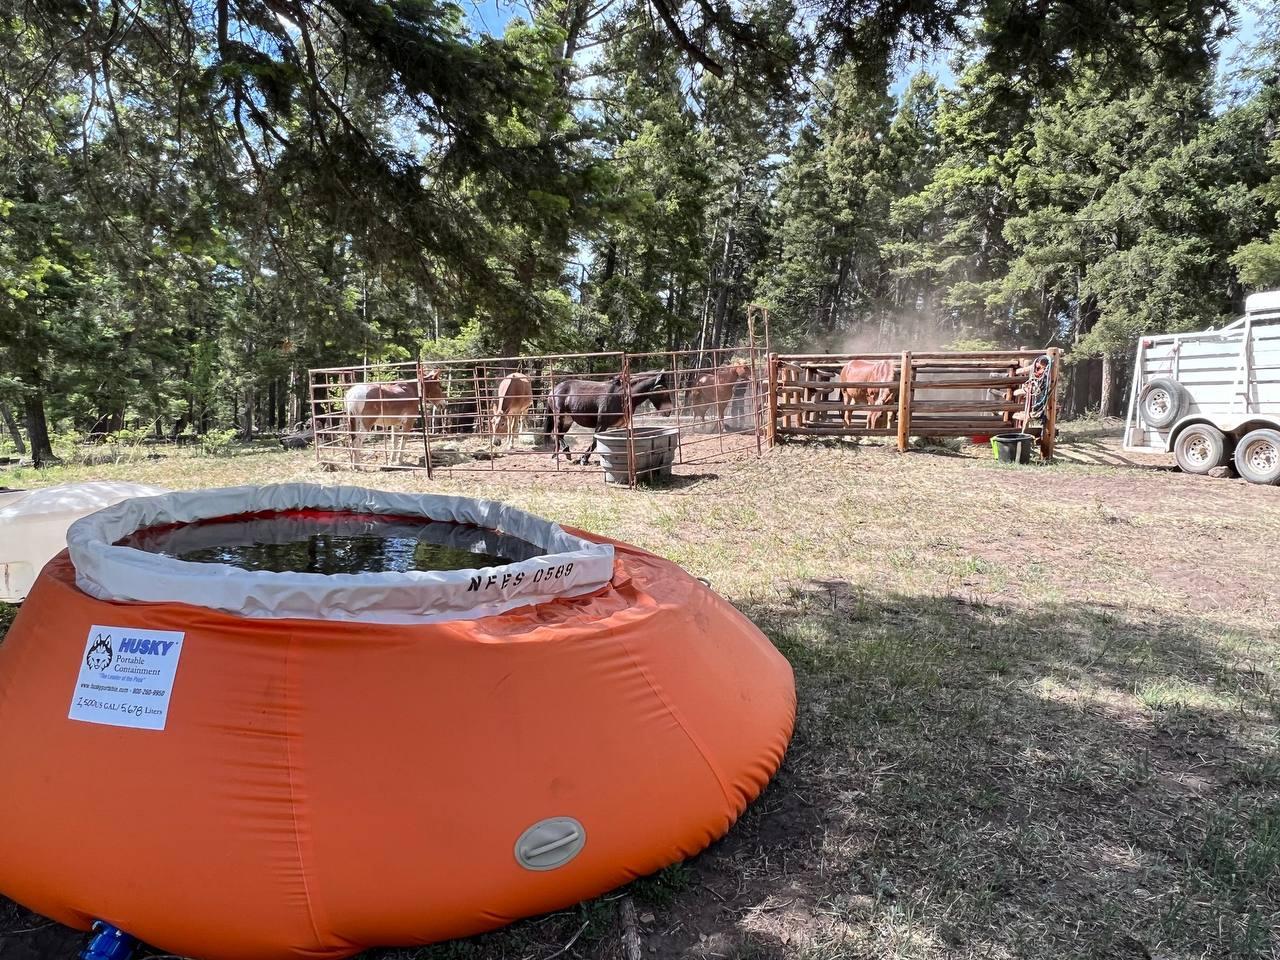 Orange water tank in the shape of a pumpkin in foreground. Background has corrals holding multiple mules and horses. Horse trailer to the side and trees in background